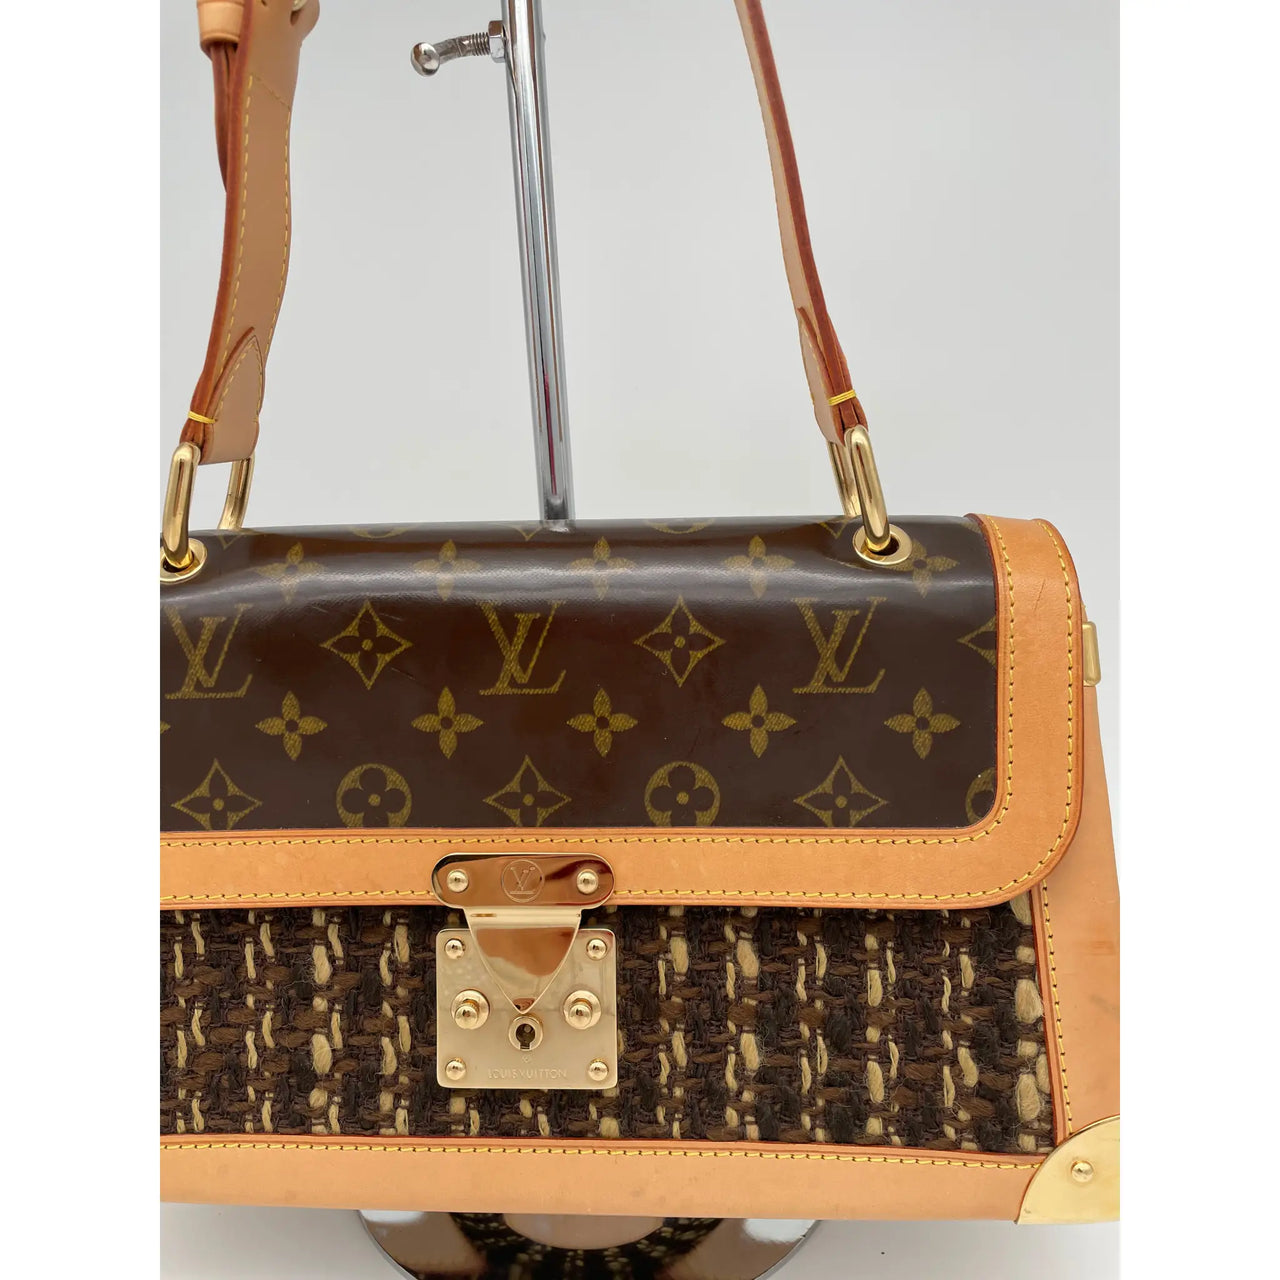 AUTHENTIC LOUIS VUITTON LIMITED EDITION TWEEDY BRAND NEW WITH TAGS